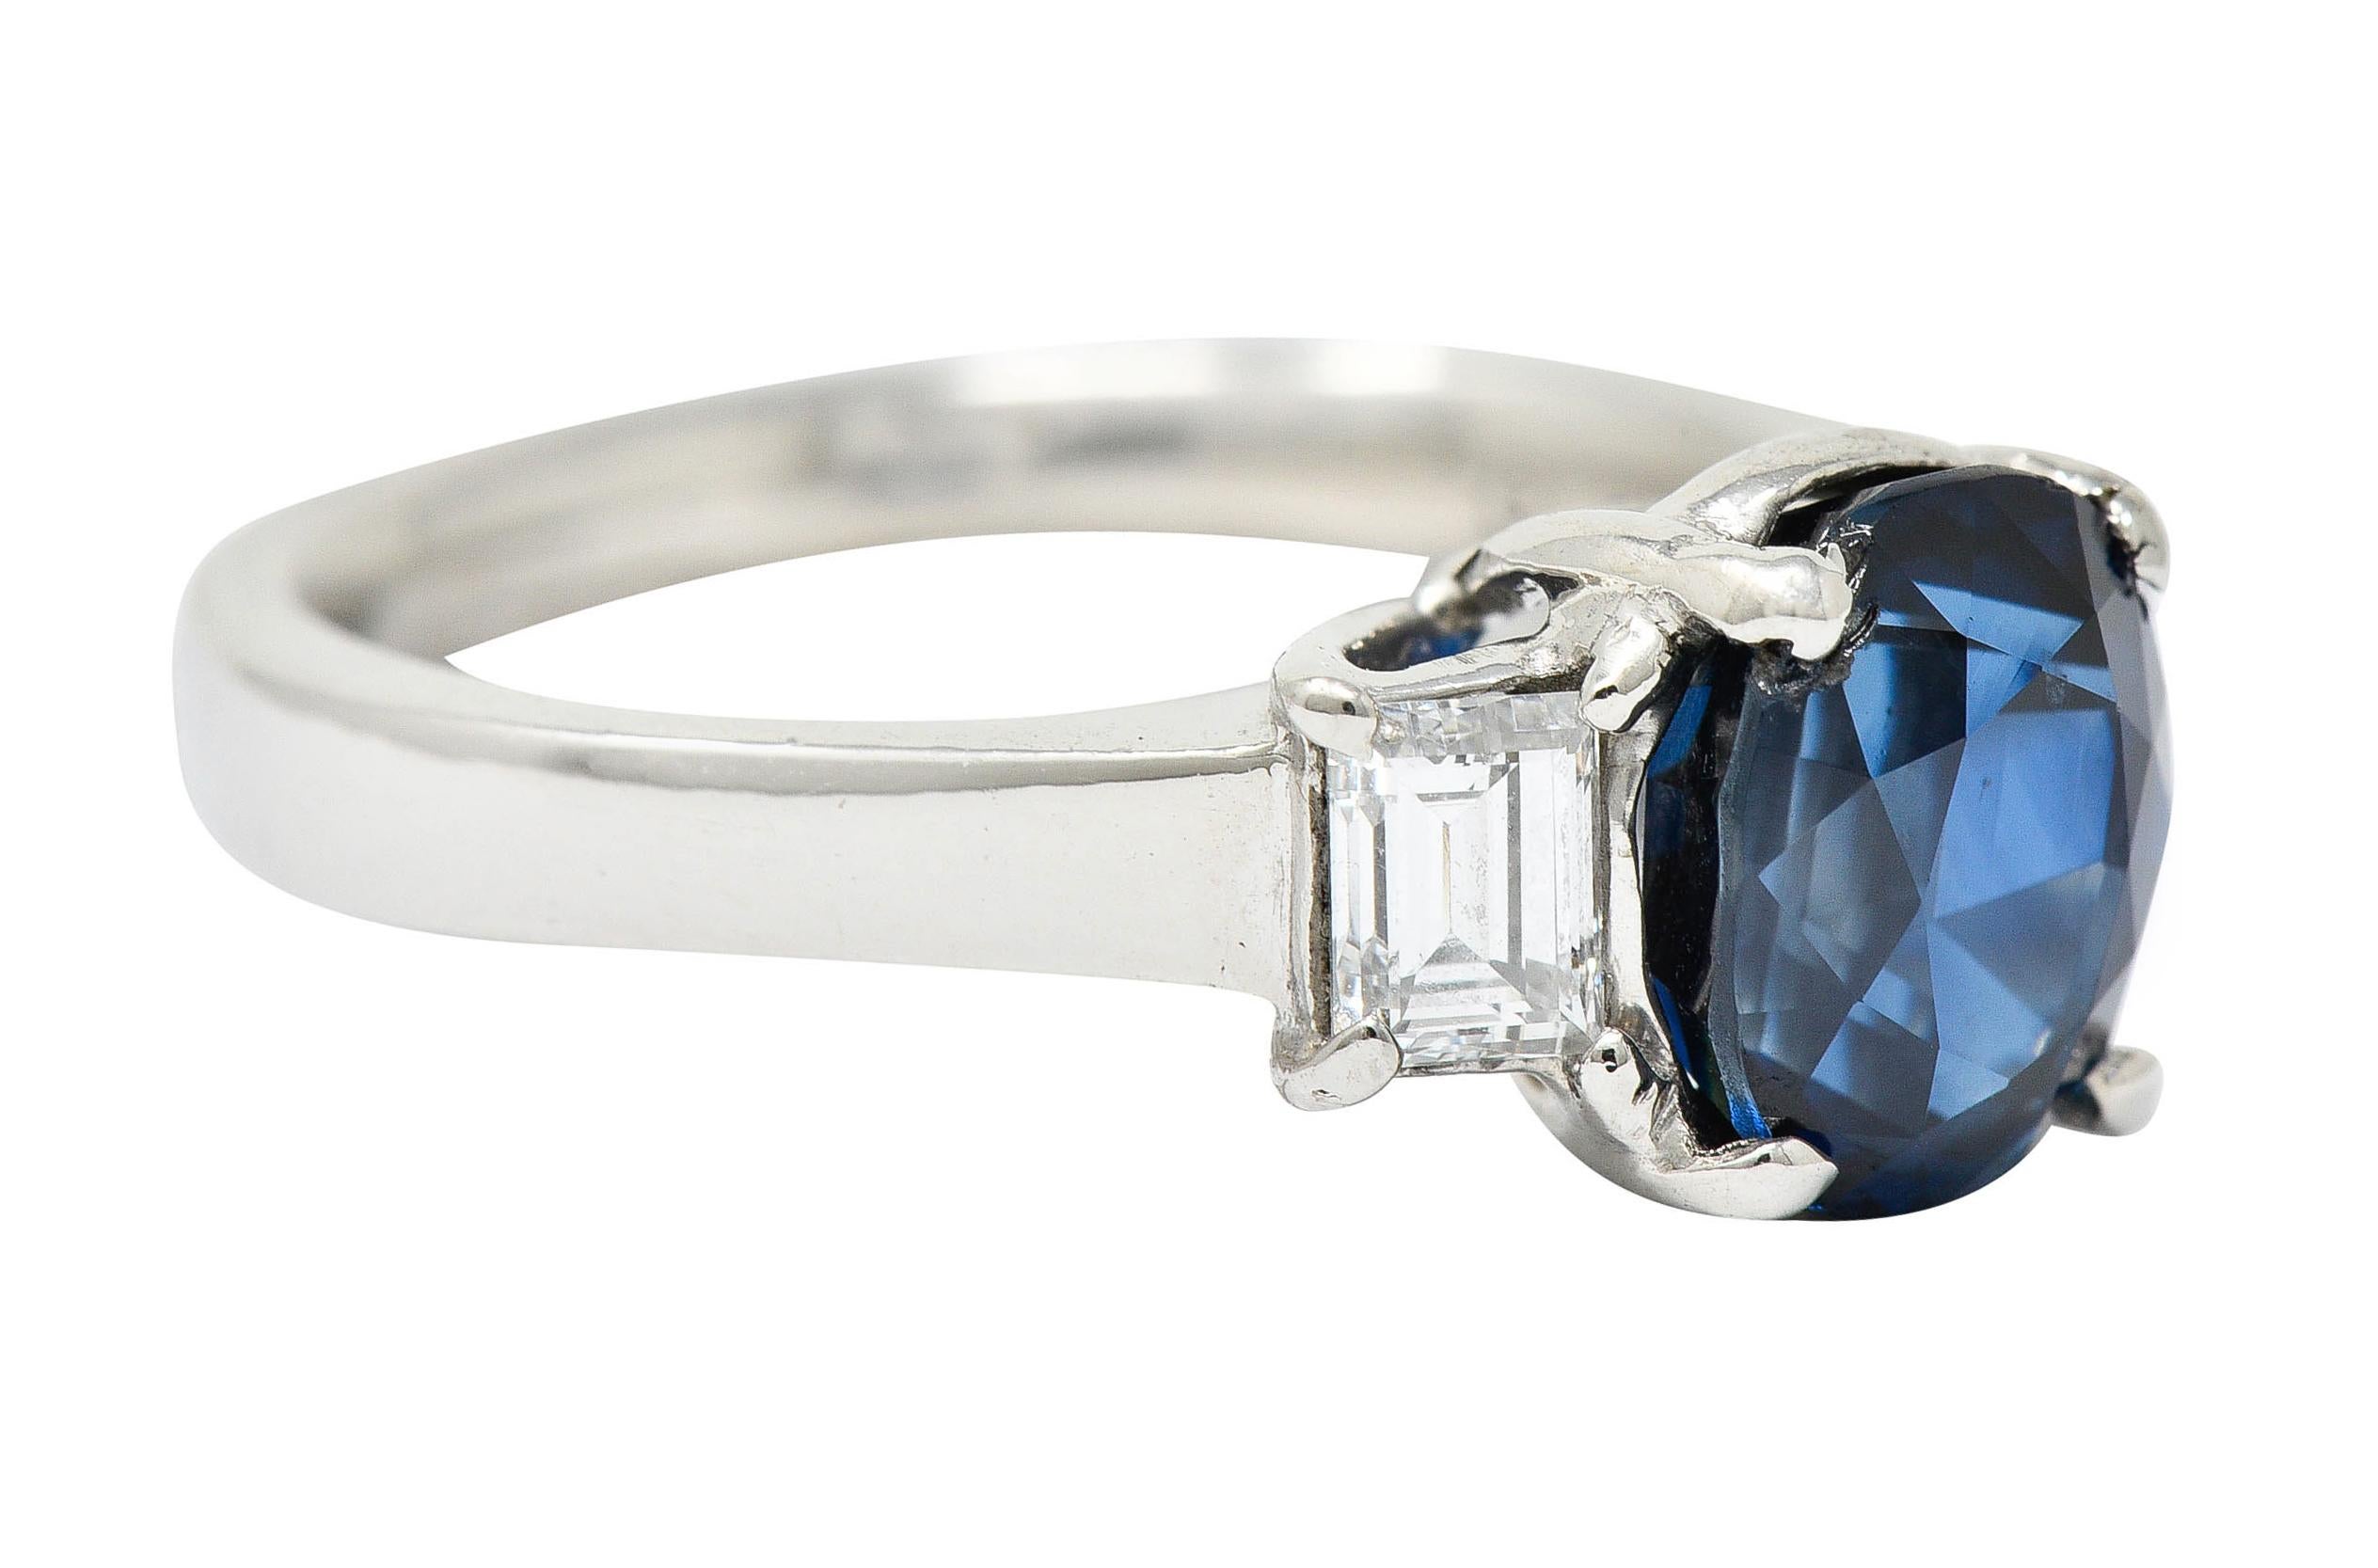 Designed as a basket set three stone ring

Centering an oval cut sapphire weighing approximately 3.00 carats - medium dark blue in color

Flanked by two rectangular step cut diamonds weighing in total approximately 0.36 carat - G/H color with VS